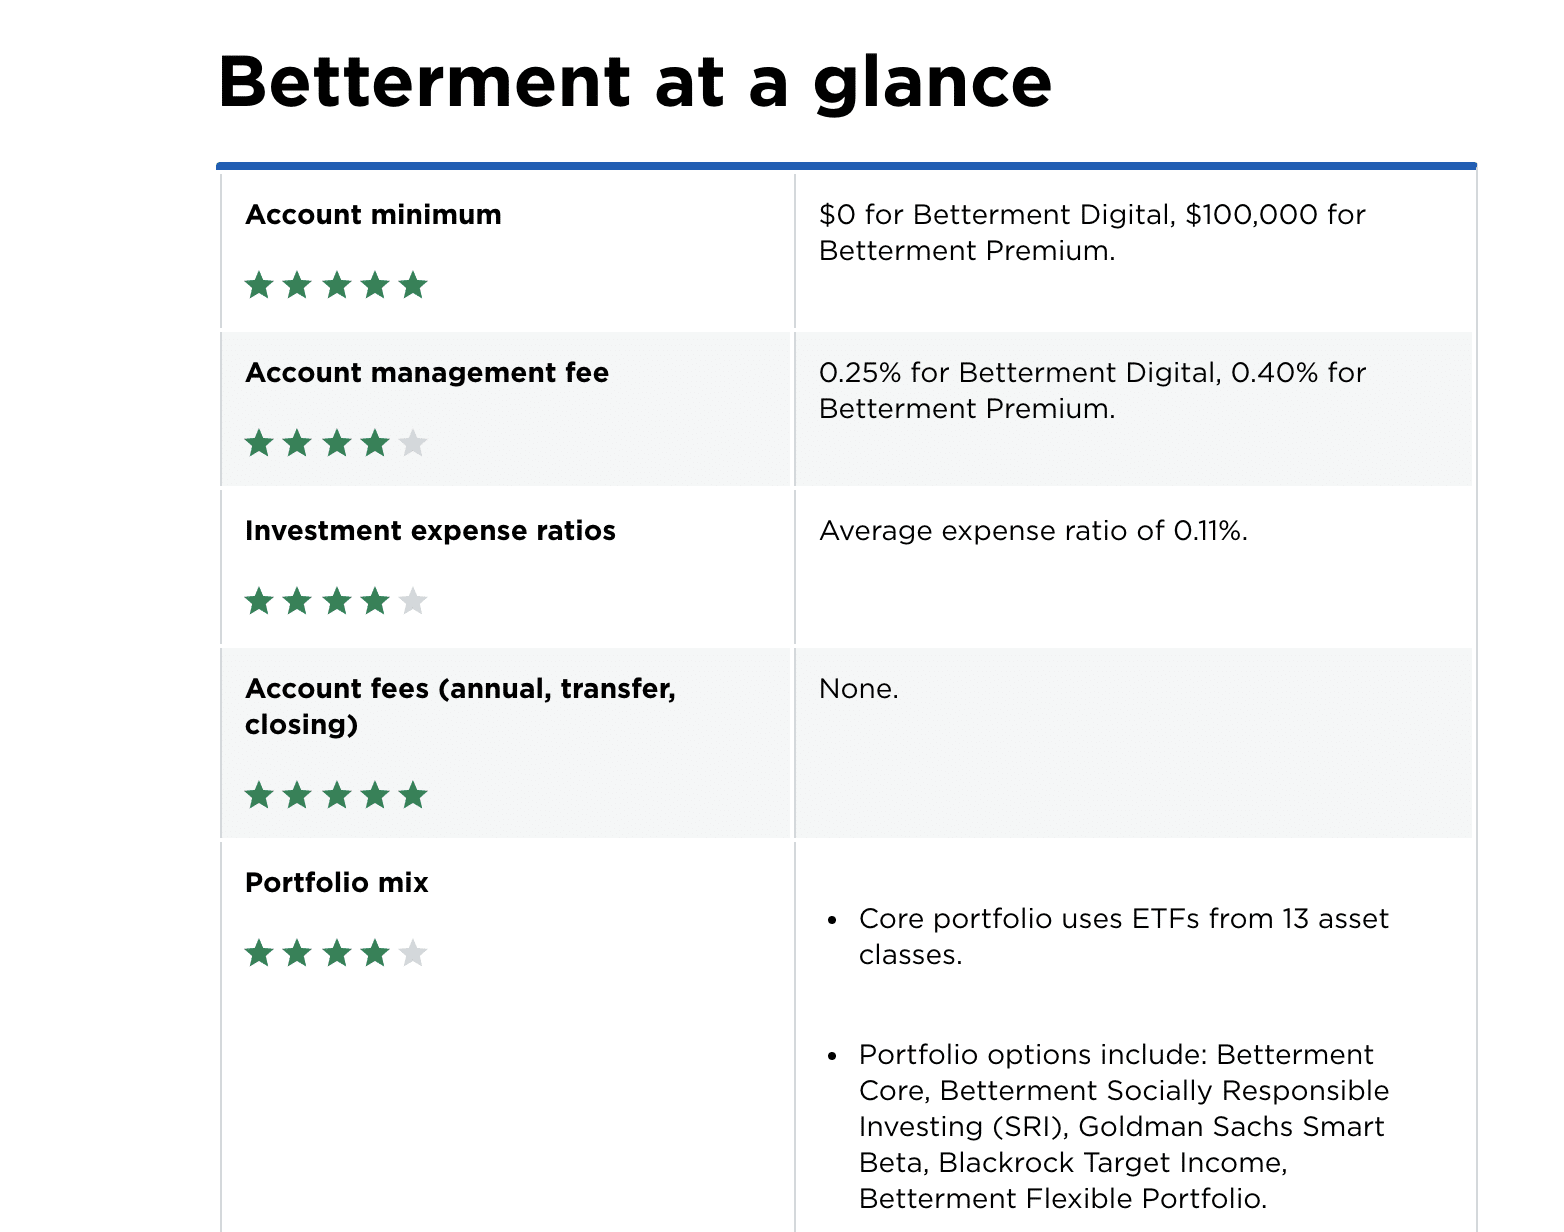 a betterment at a glance section displaying account minimums fees and expense ratios